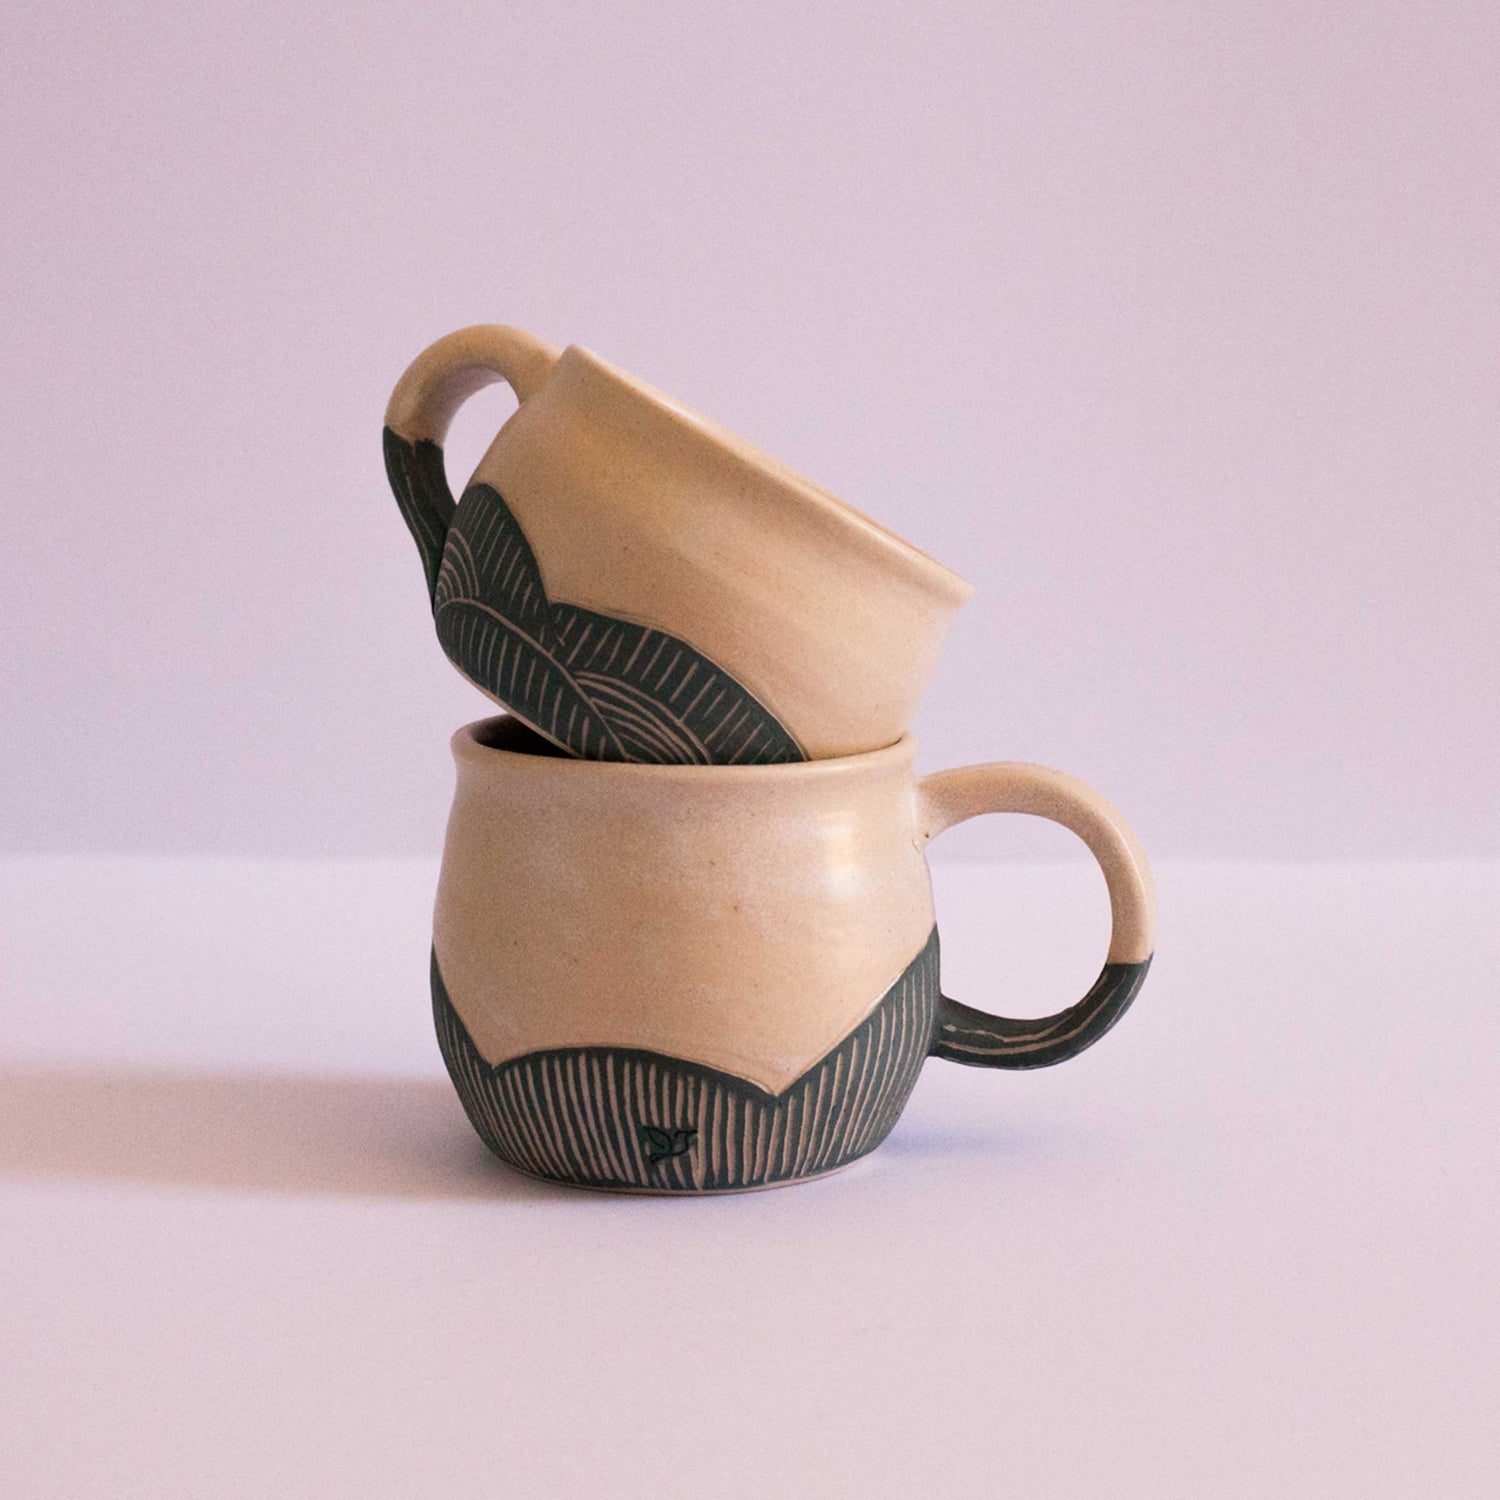 Two handmade Earth and Nectar mugs stacked inside one another